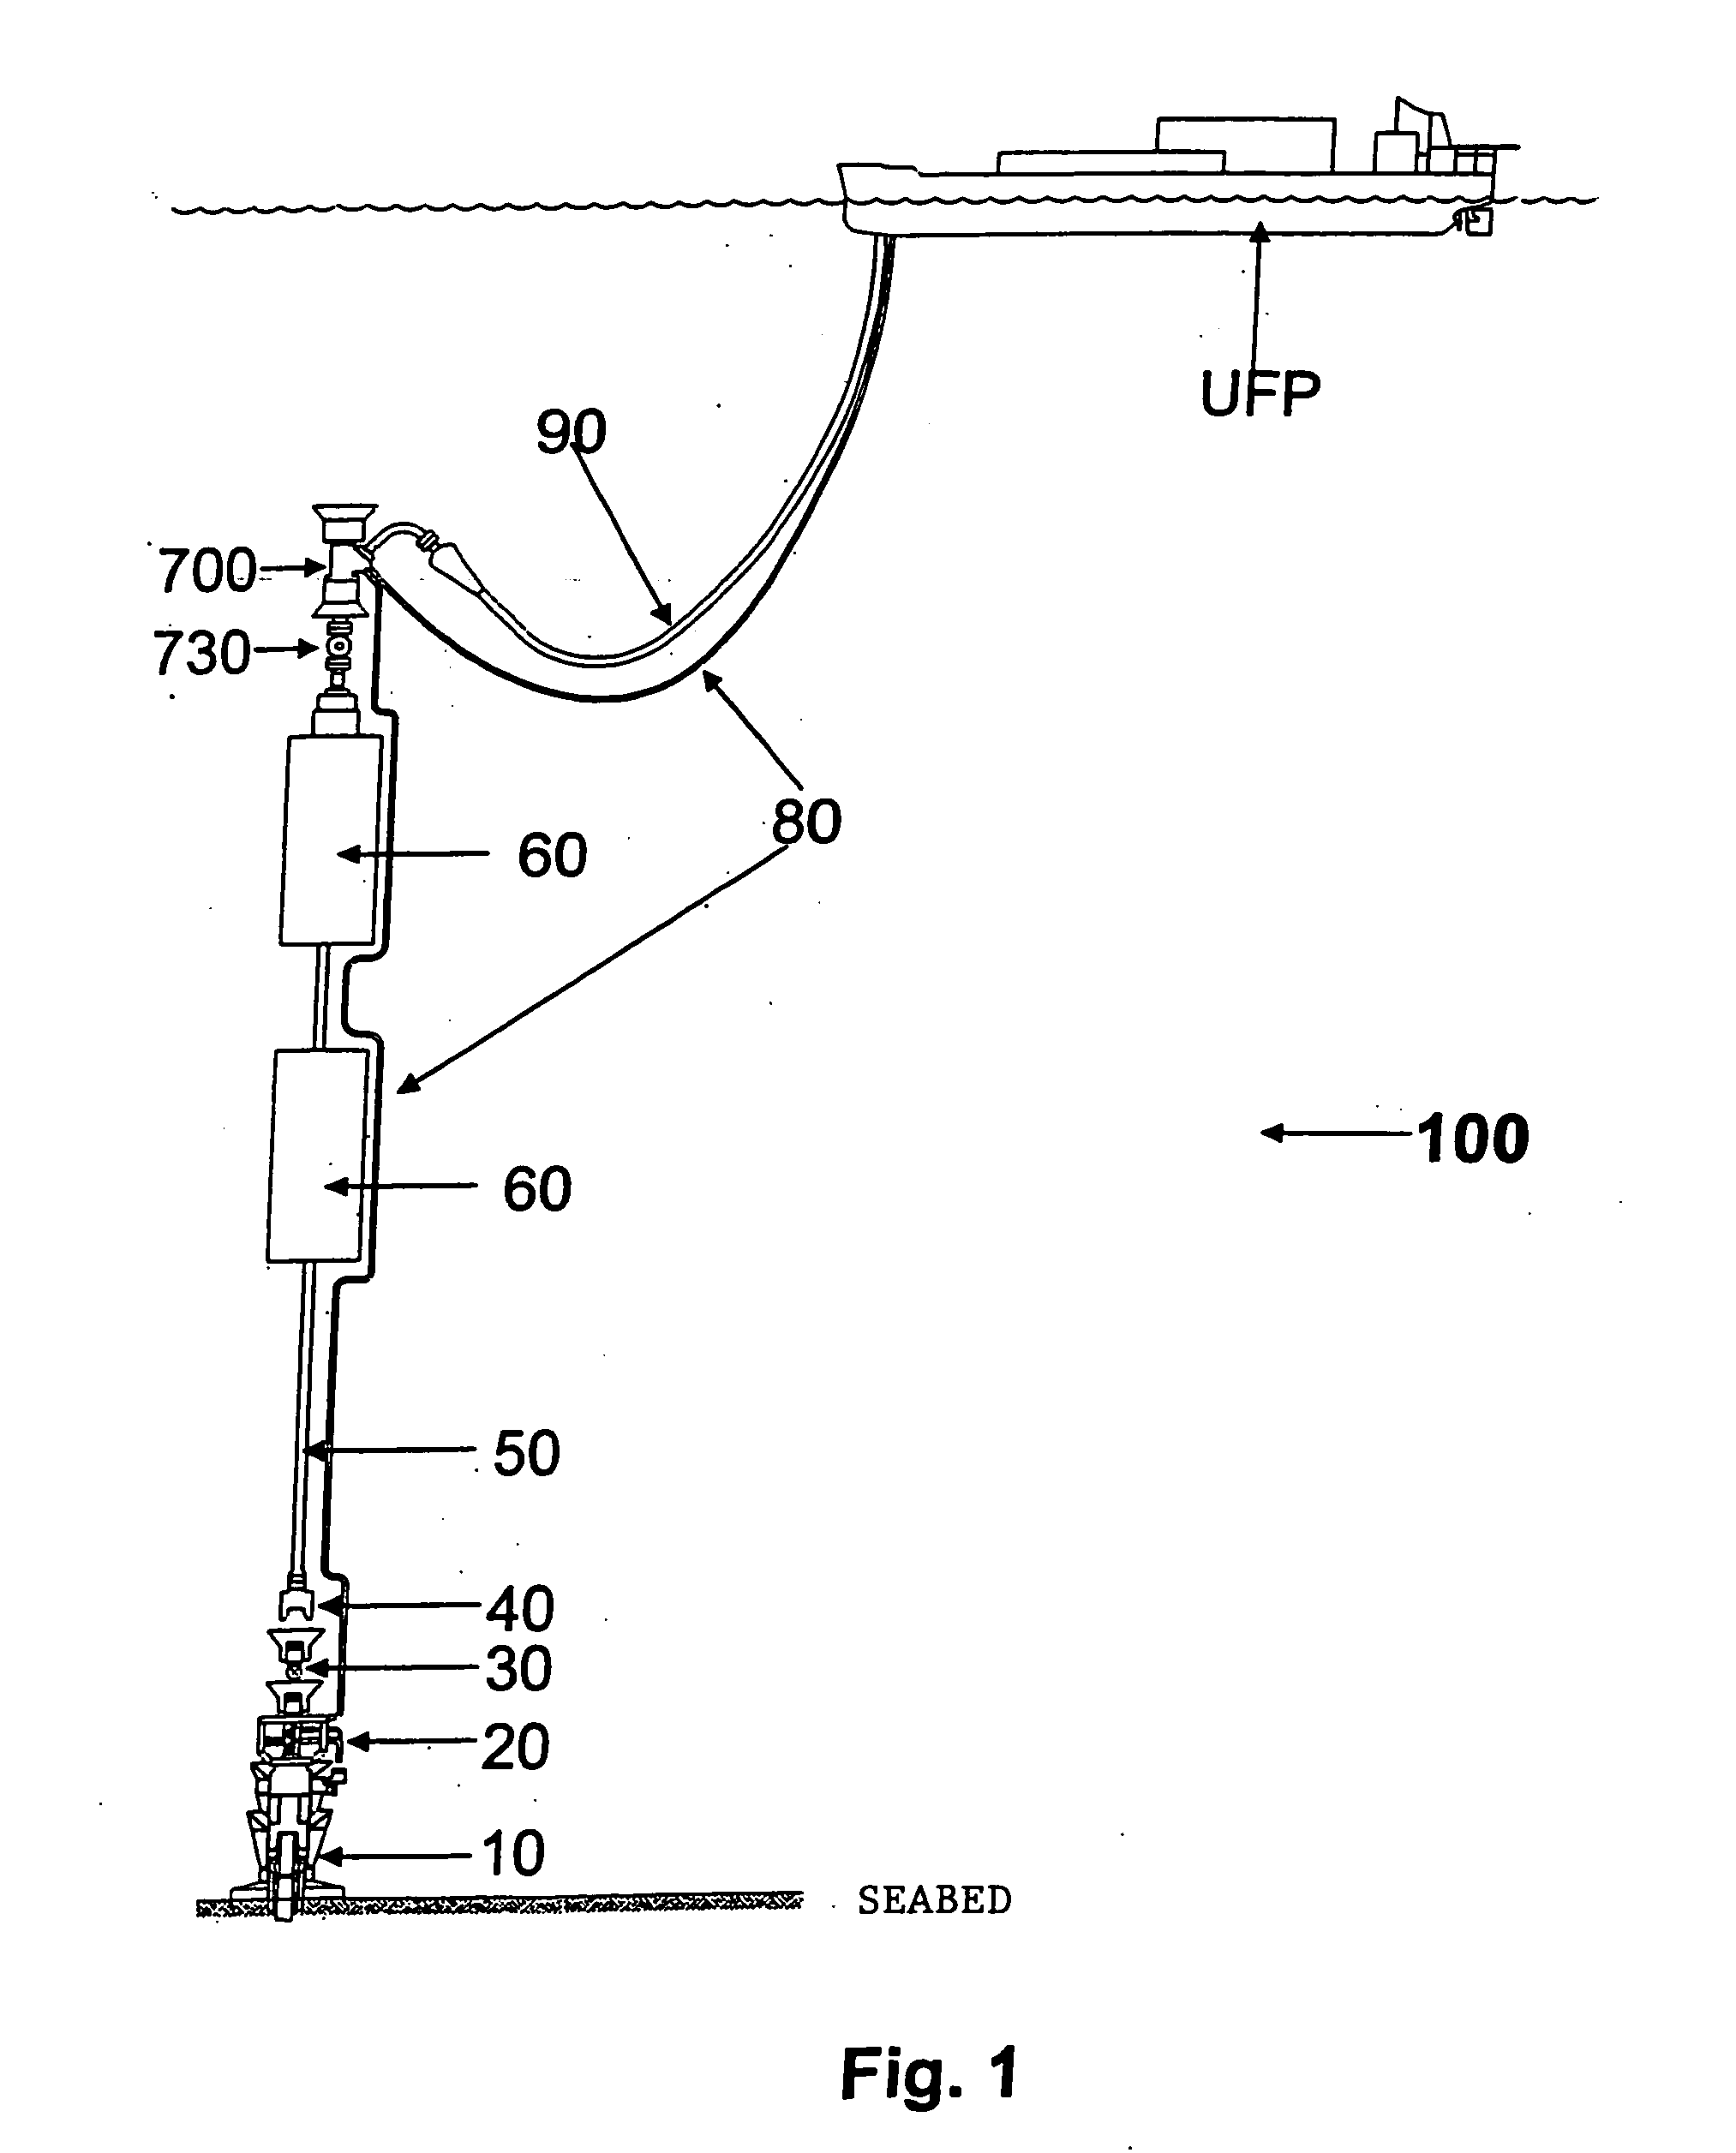 Self-supported riser system and method of installing same